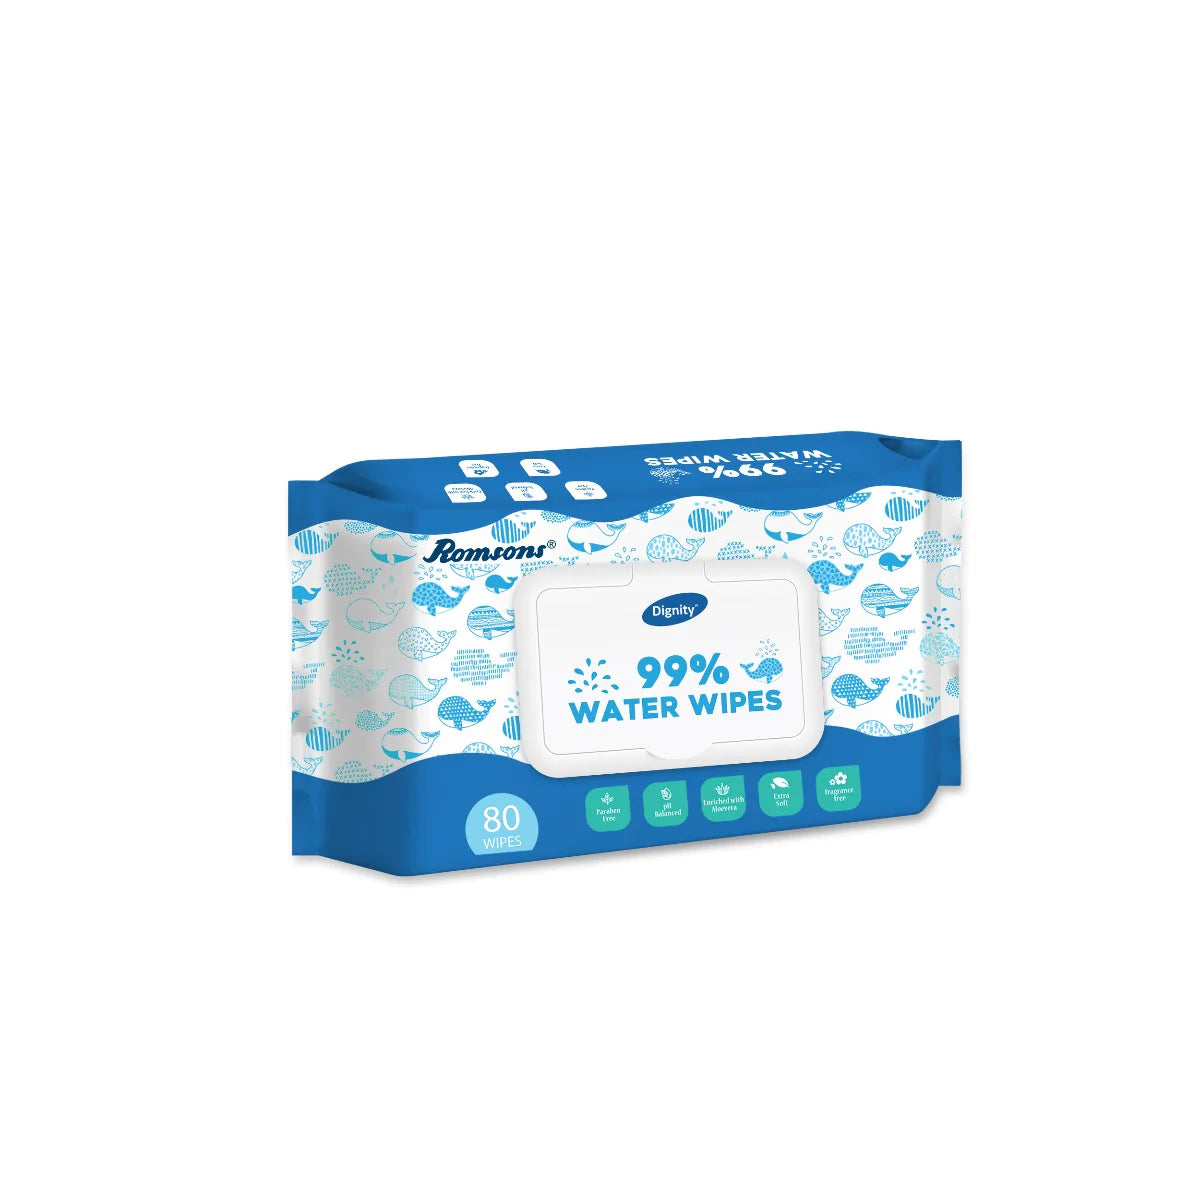 Dignity 99% Water Wipes  (80 Wipes/Pack)